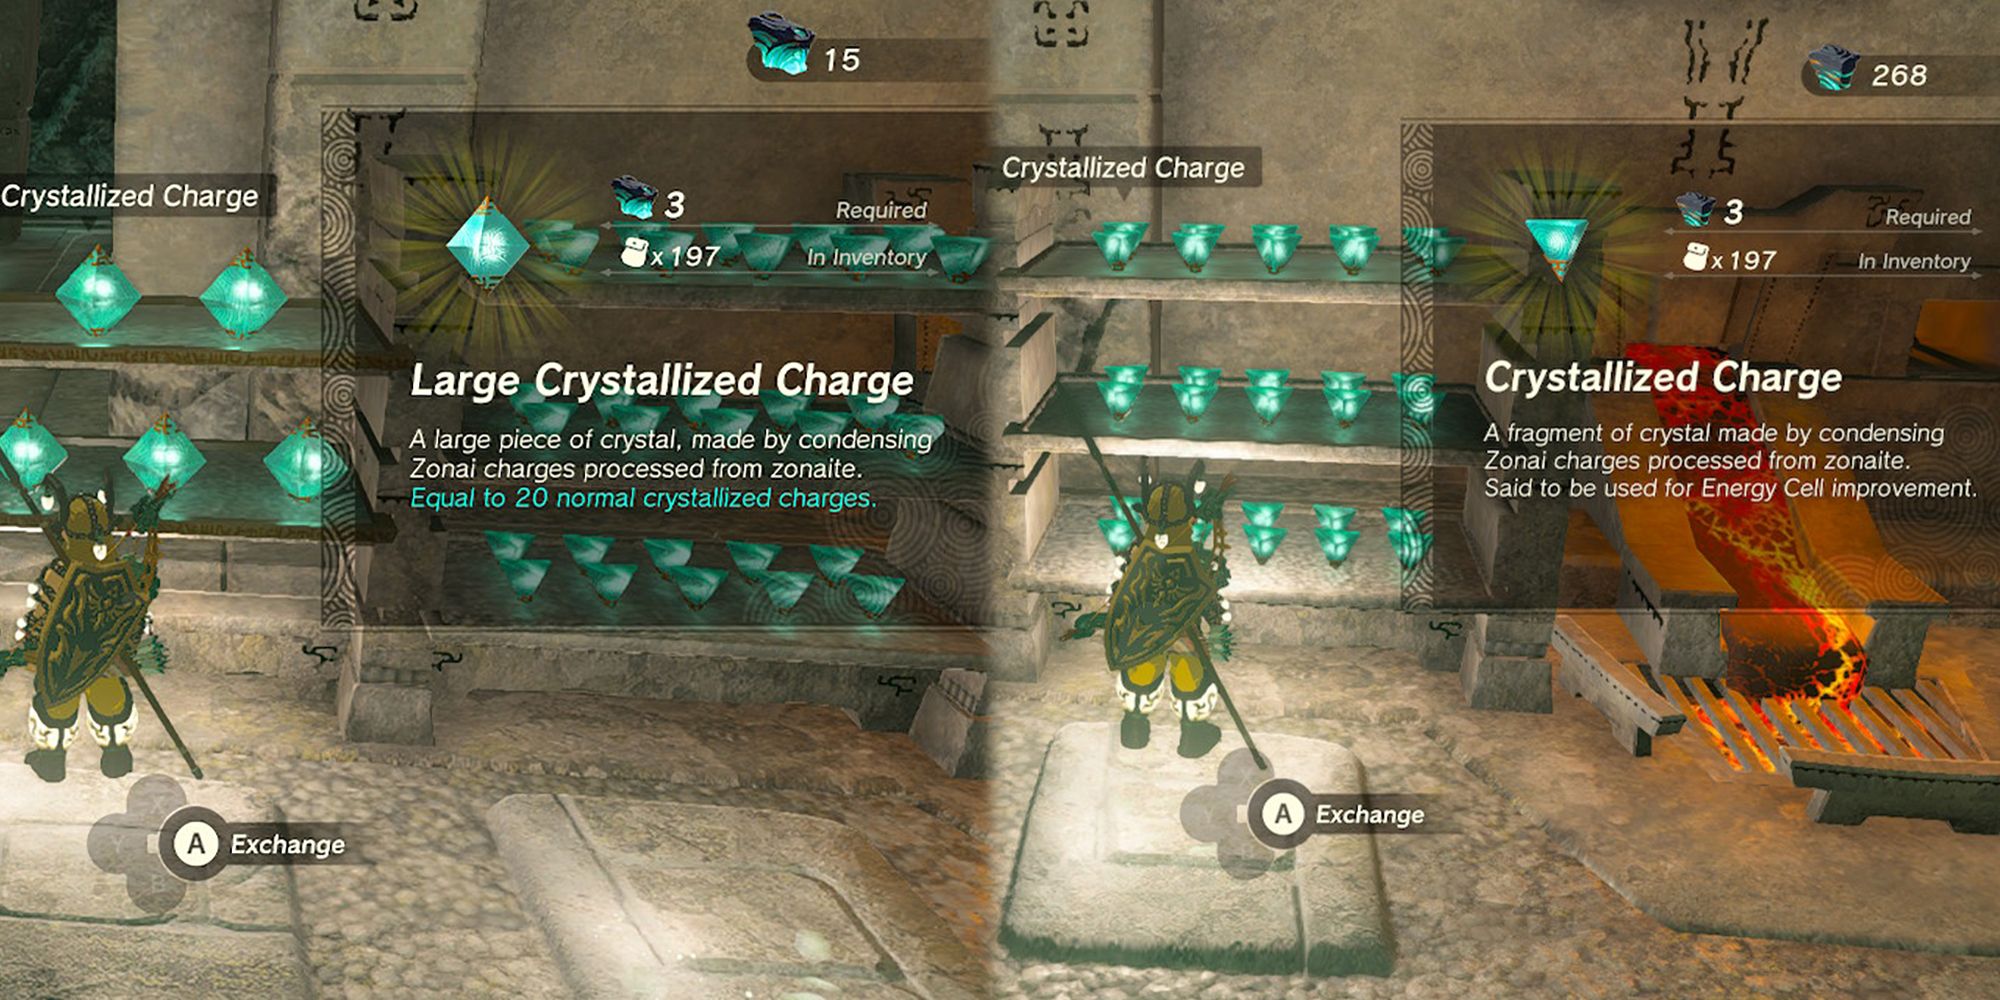 Legend of Zelda Tears of the Kingdom - Buying Both Regular And Large Crystalized Charges